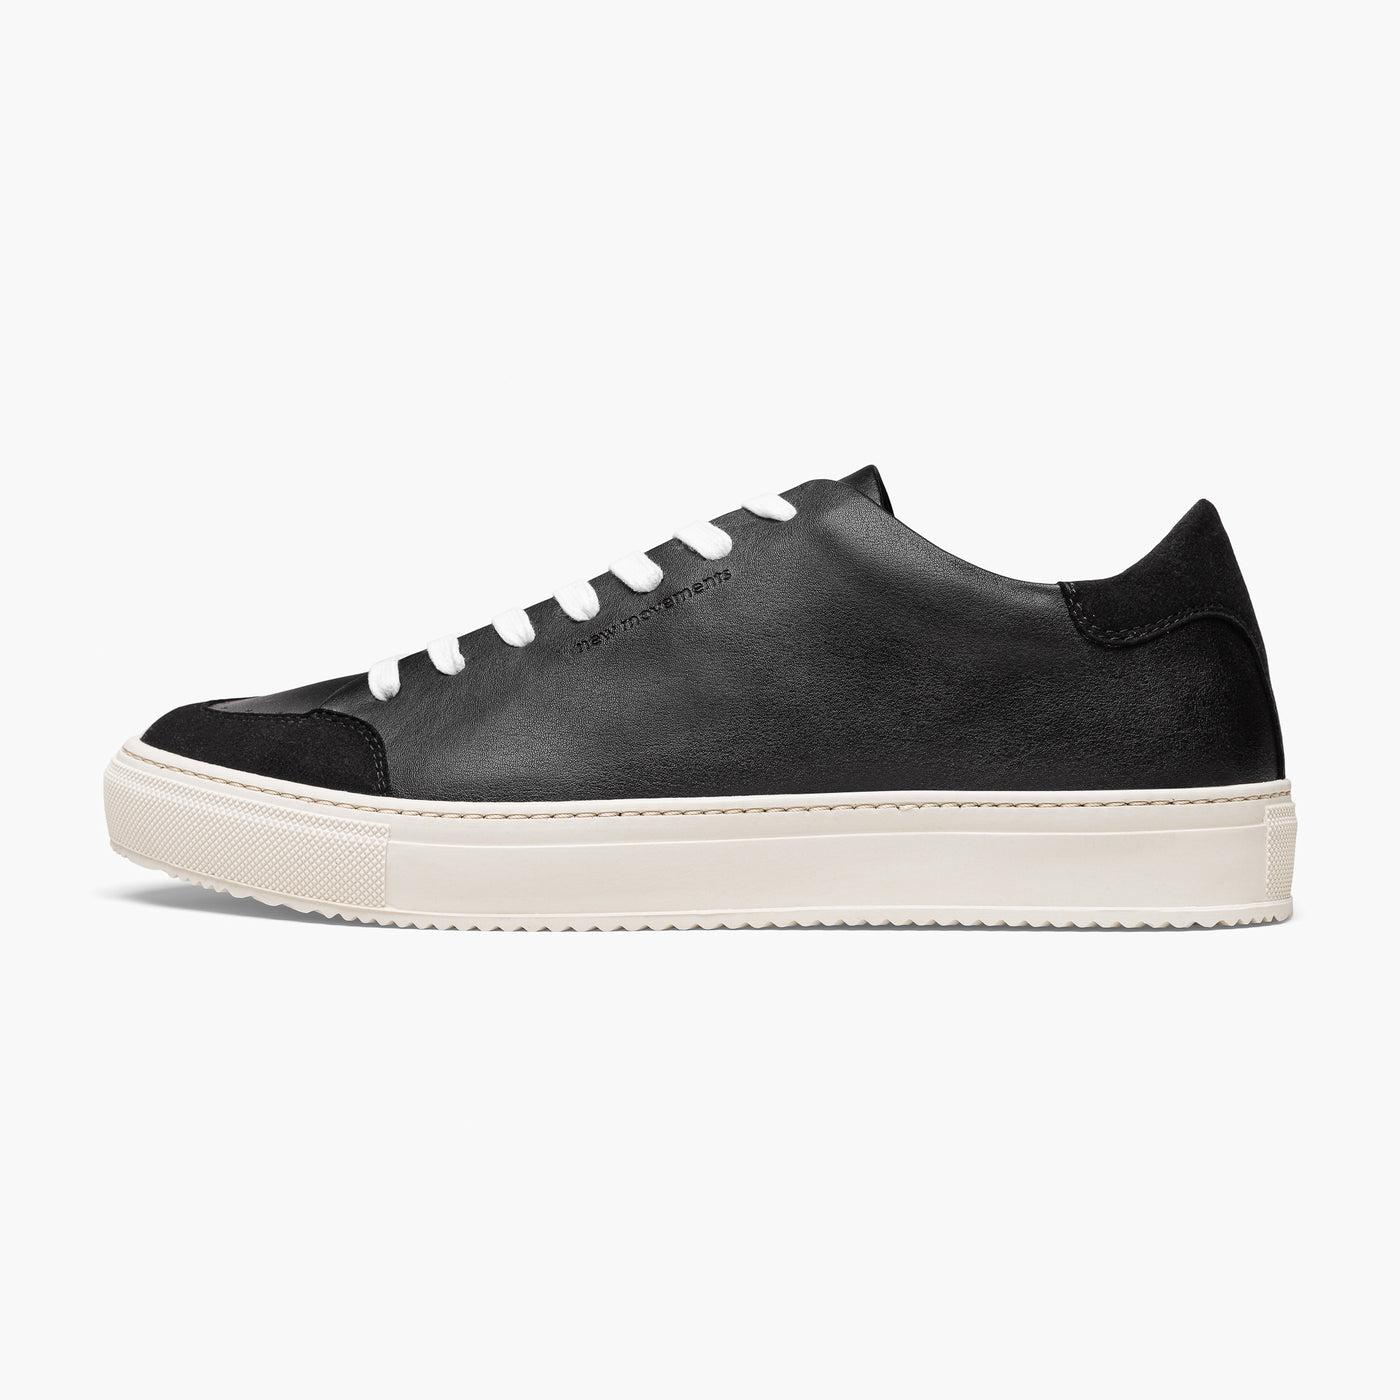 Cruiser (Leather) sneaker | Sustainable and responsibly made sneakers ...